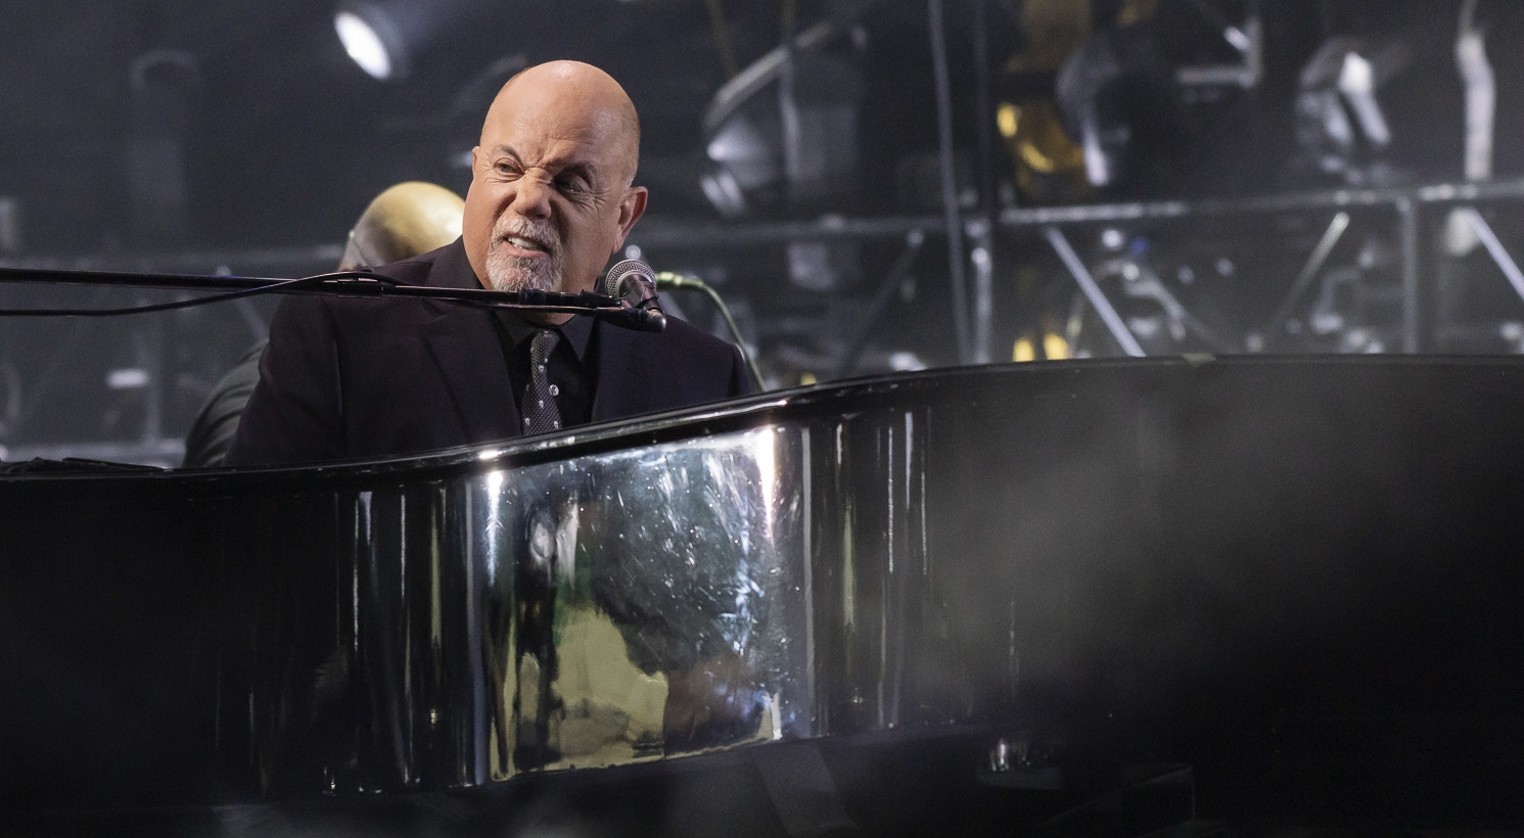 Billy Joel Was the Last Performer at Arlington's Globe Life Park, and